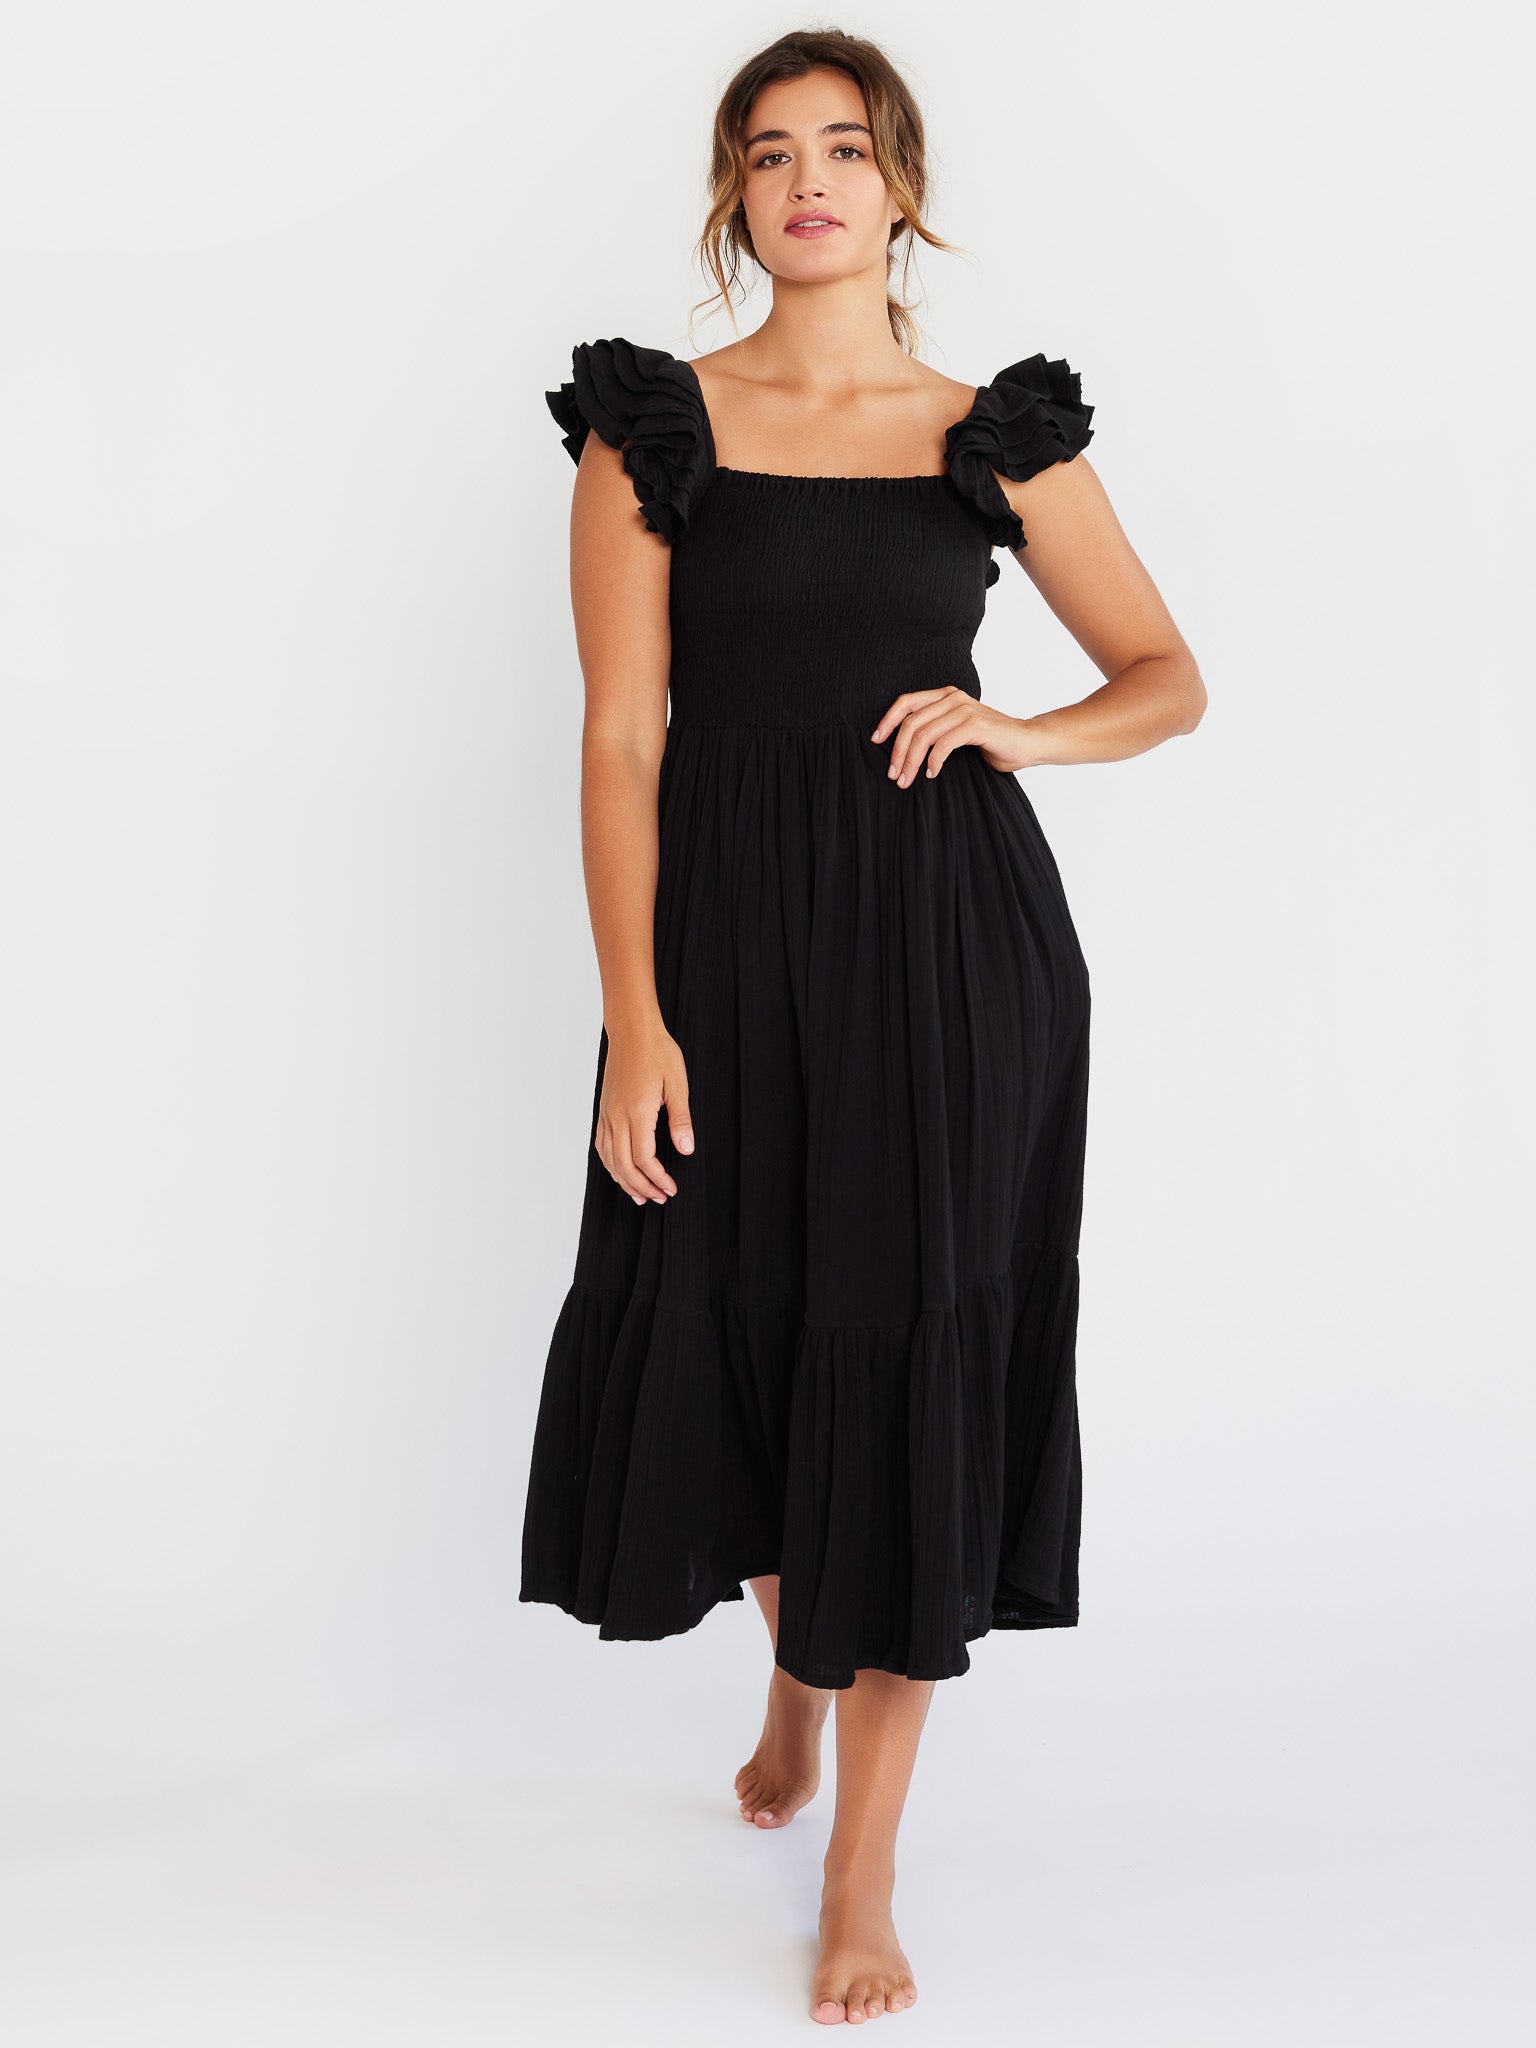 MILLE Clothing Olympia Dress in Black Double Gauze